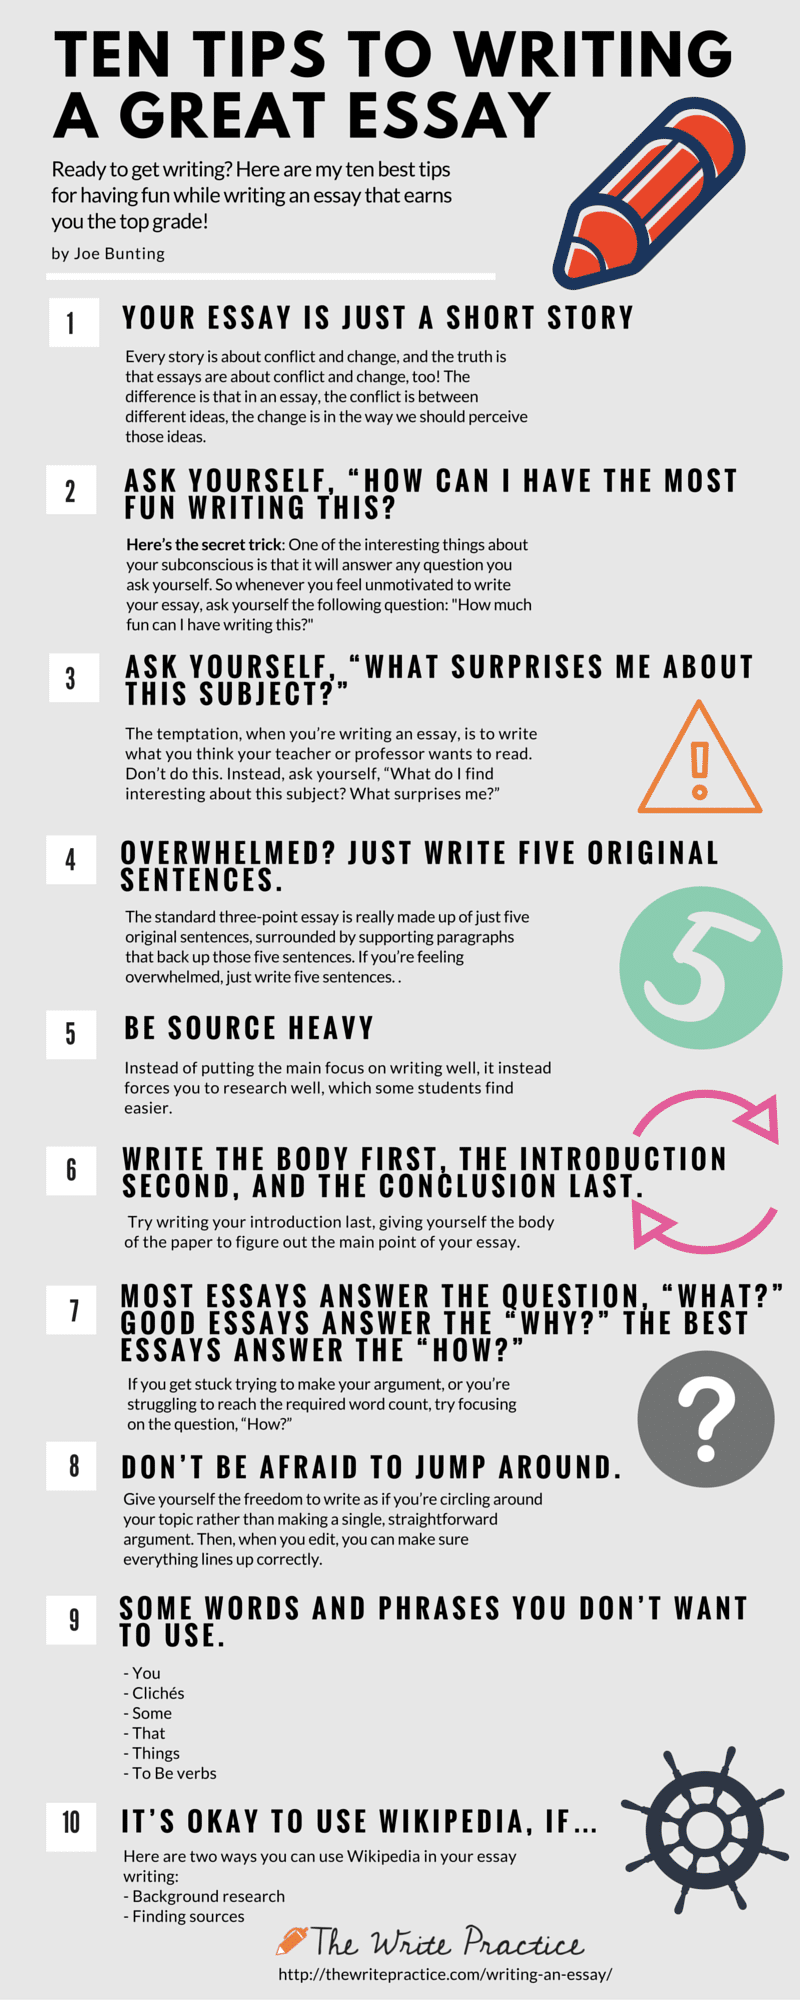 6 Writing Tips To Make Your Papers 300% Better